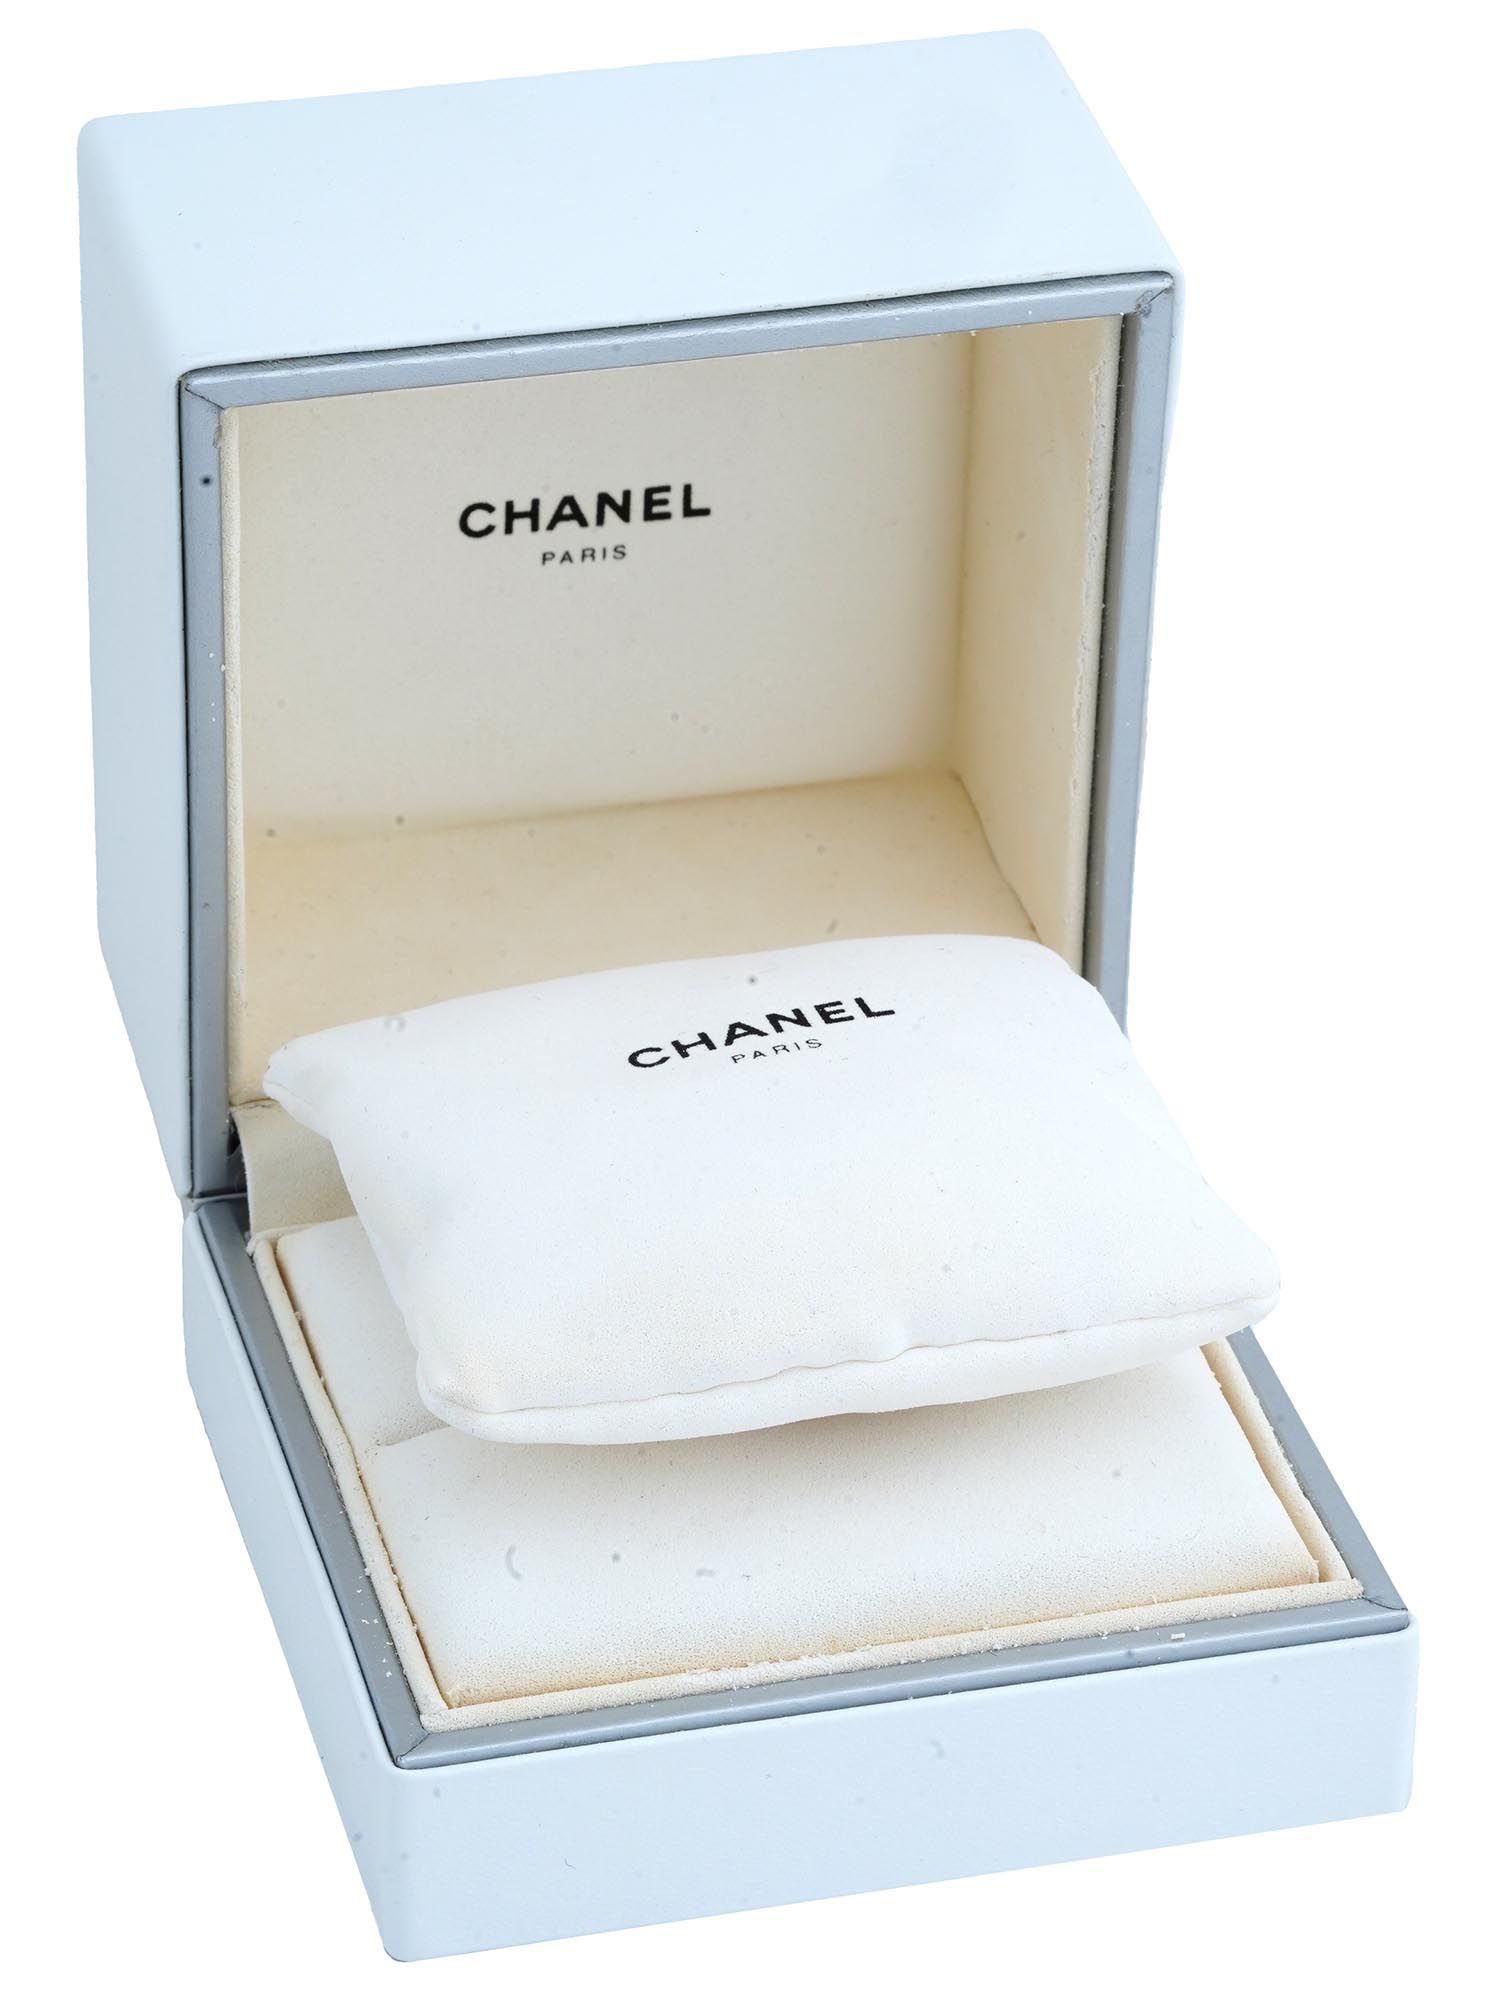 CHANEL 18K GOLD COCO CRUSH BAND RING IN A BOX PIC-1